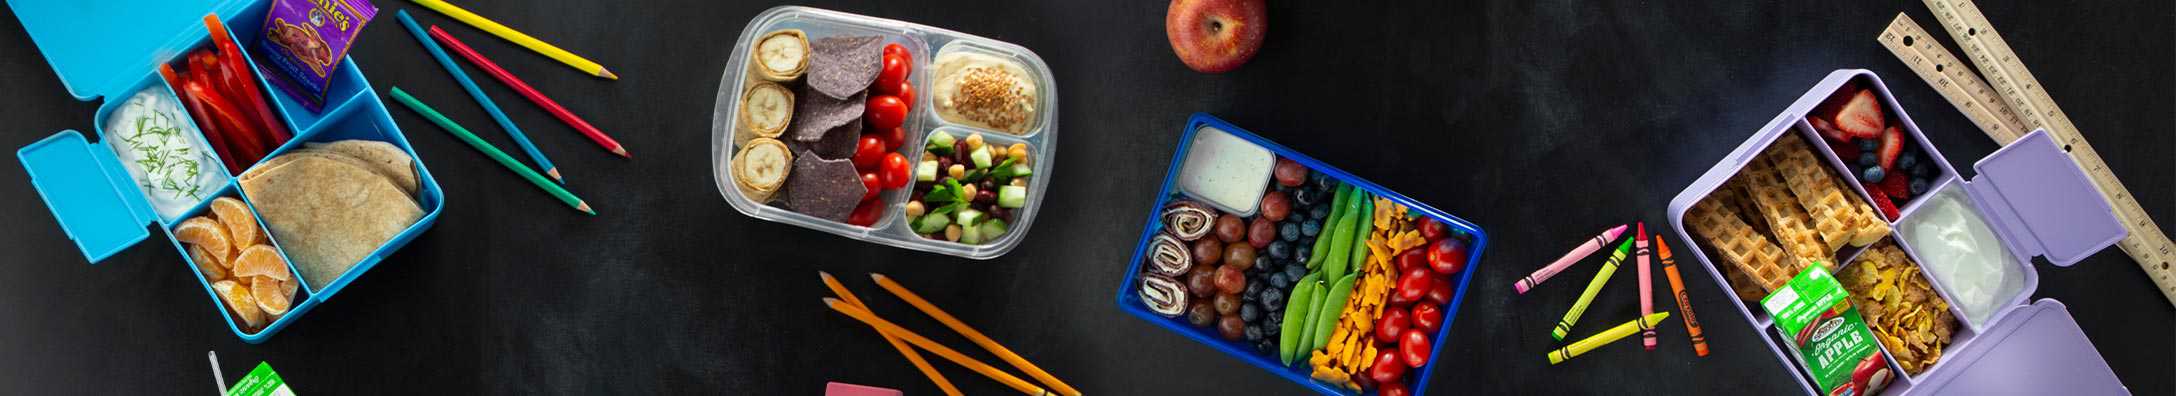 lunch boxes around school supplies on a slate background